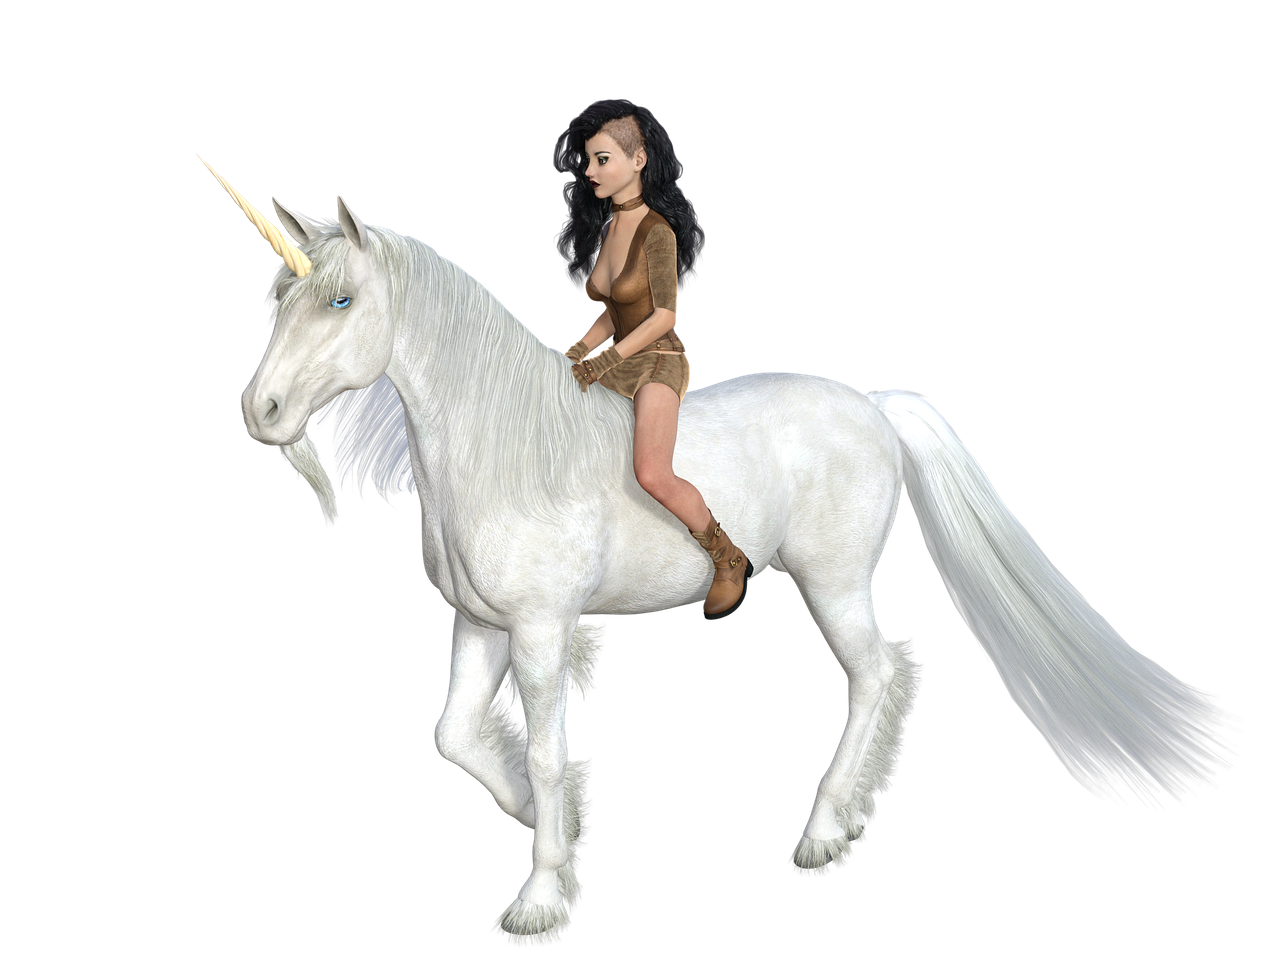 a woman riding on the back of a white horse, a raytraced image, inspired by Marina Abramović, pixabay contest winner, renaissance, soft devil queen madison beer, frank dillane as a satyr, !!highly detalied, unicorn horn